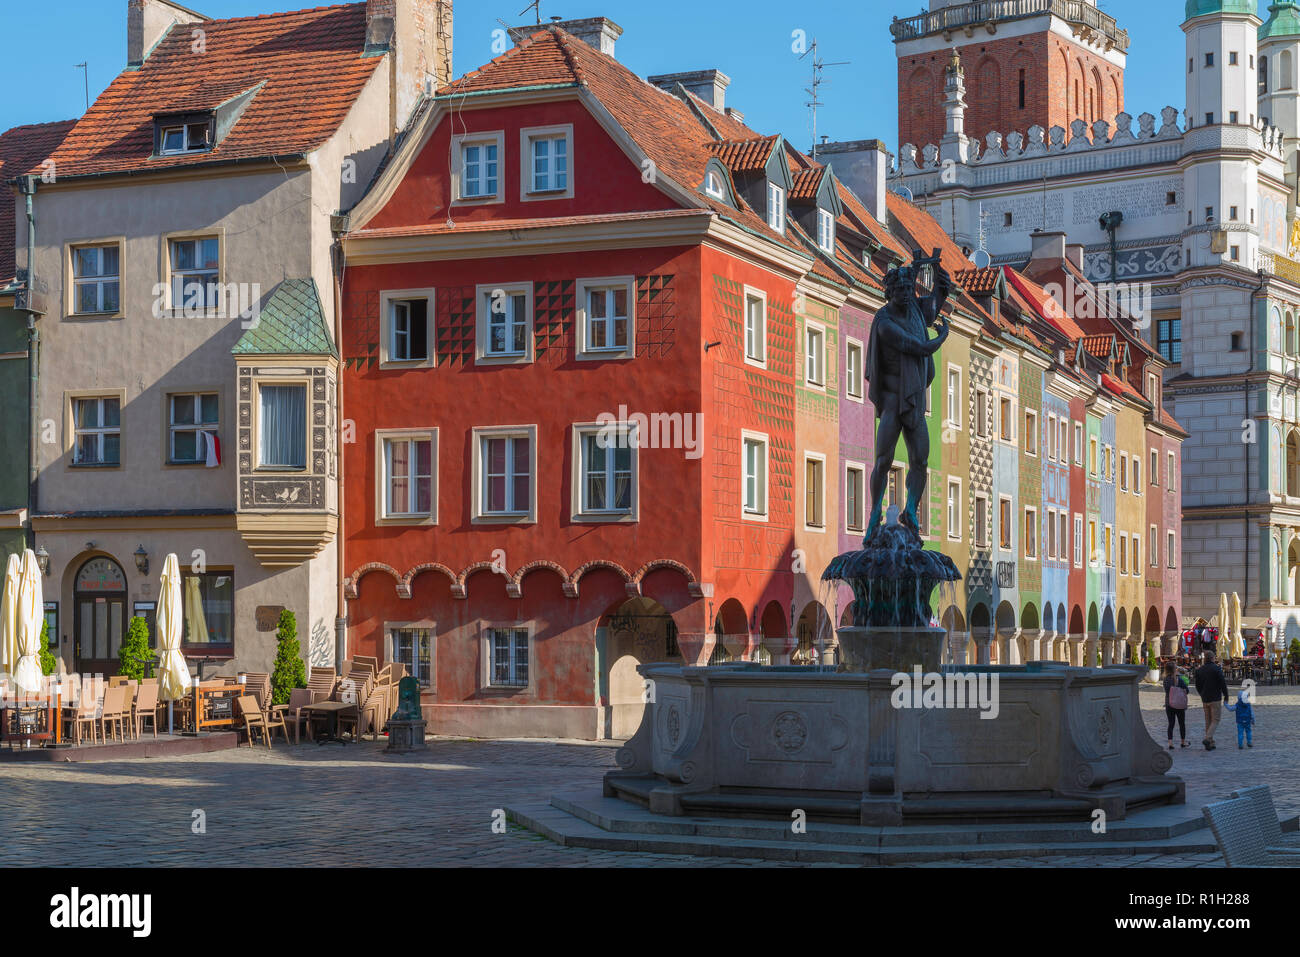 Poznan Old Town, view of Renaissance architecture and the Apollo Fountain in Poznan Market Square (Stary Rynek), Poland. Stock Photo